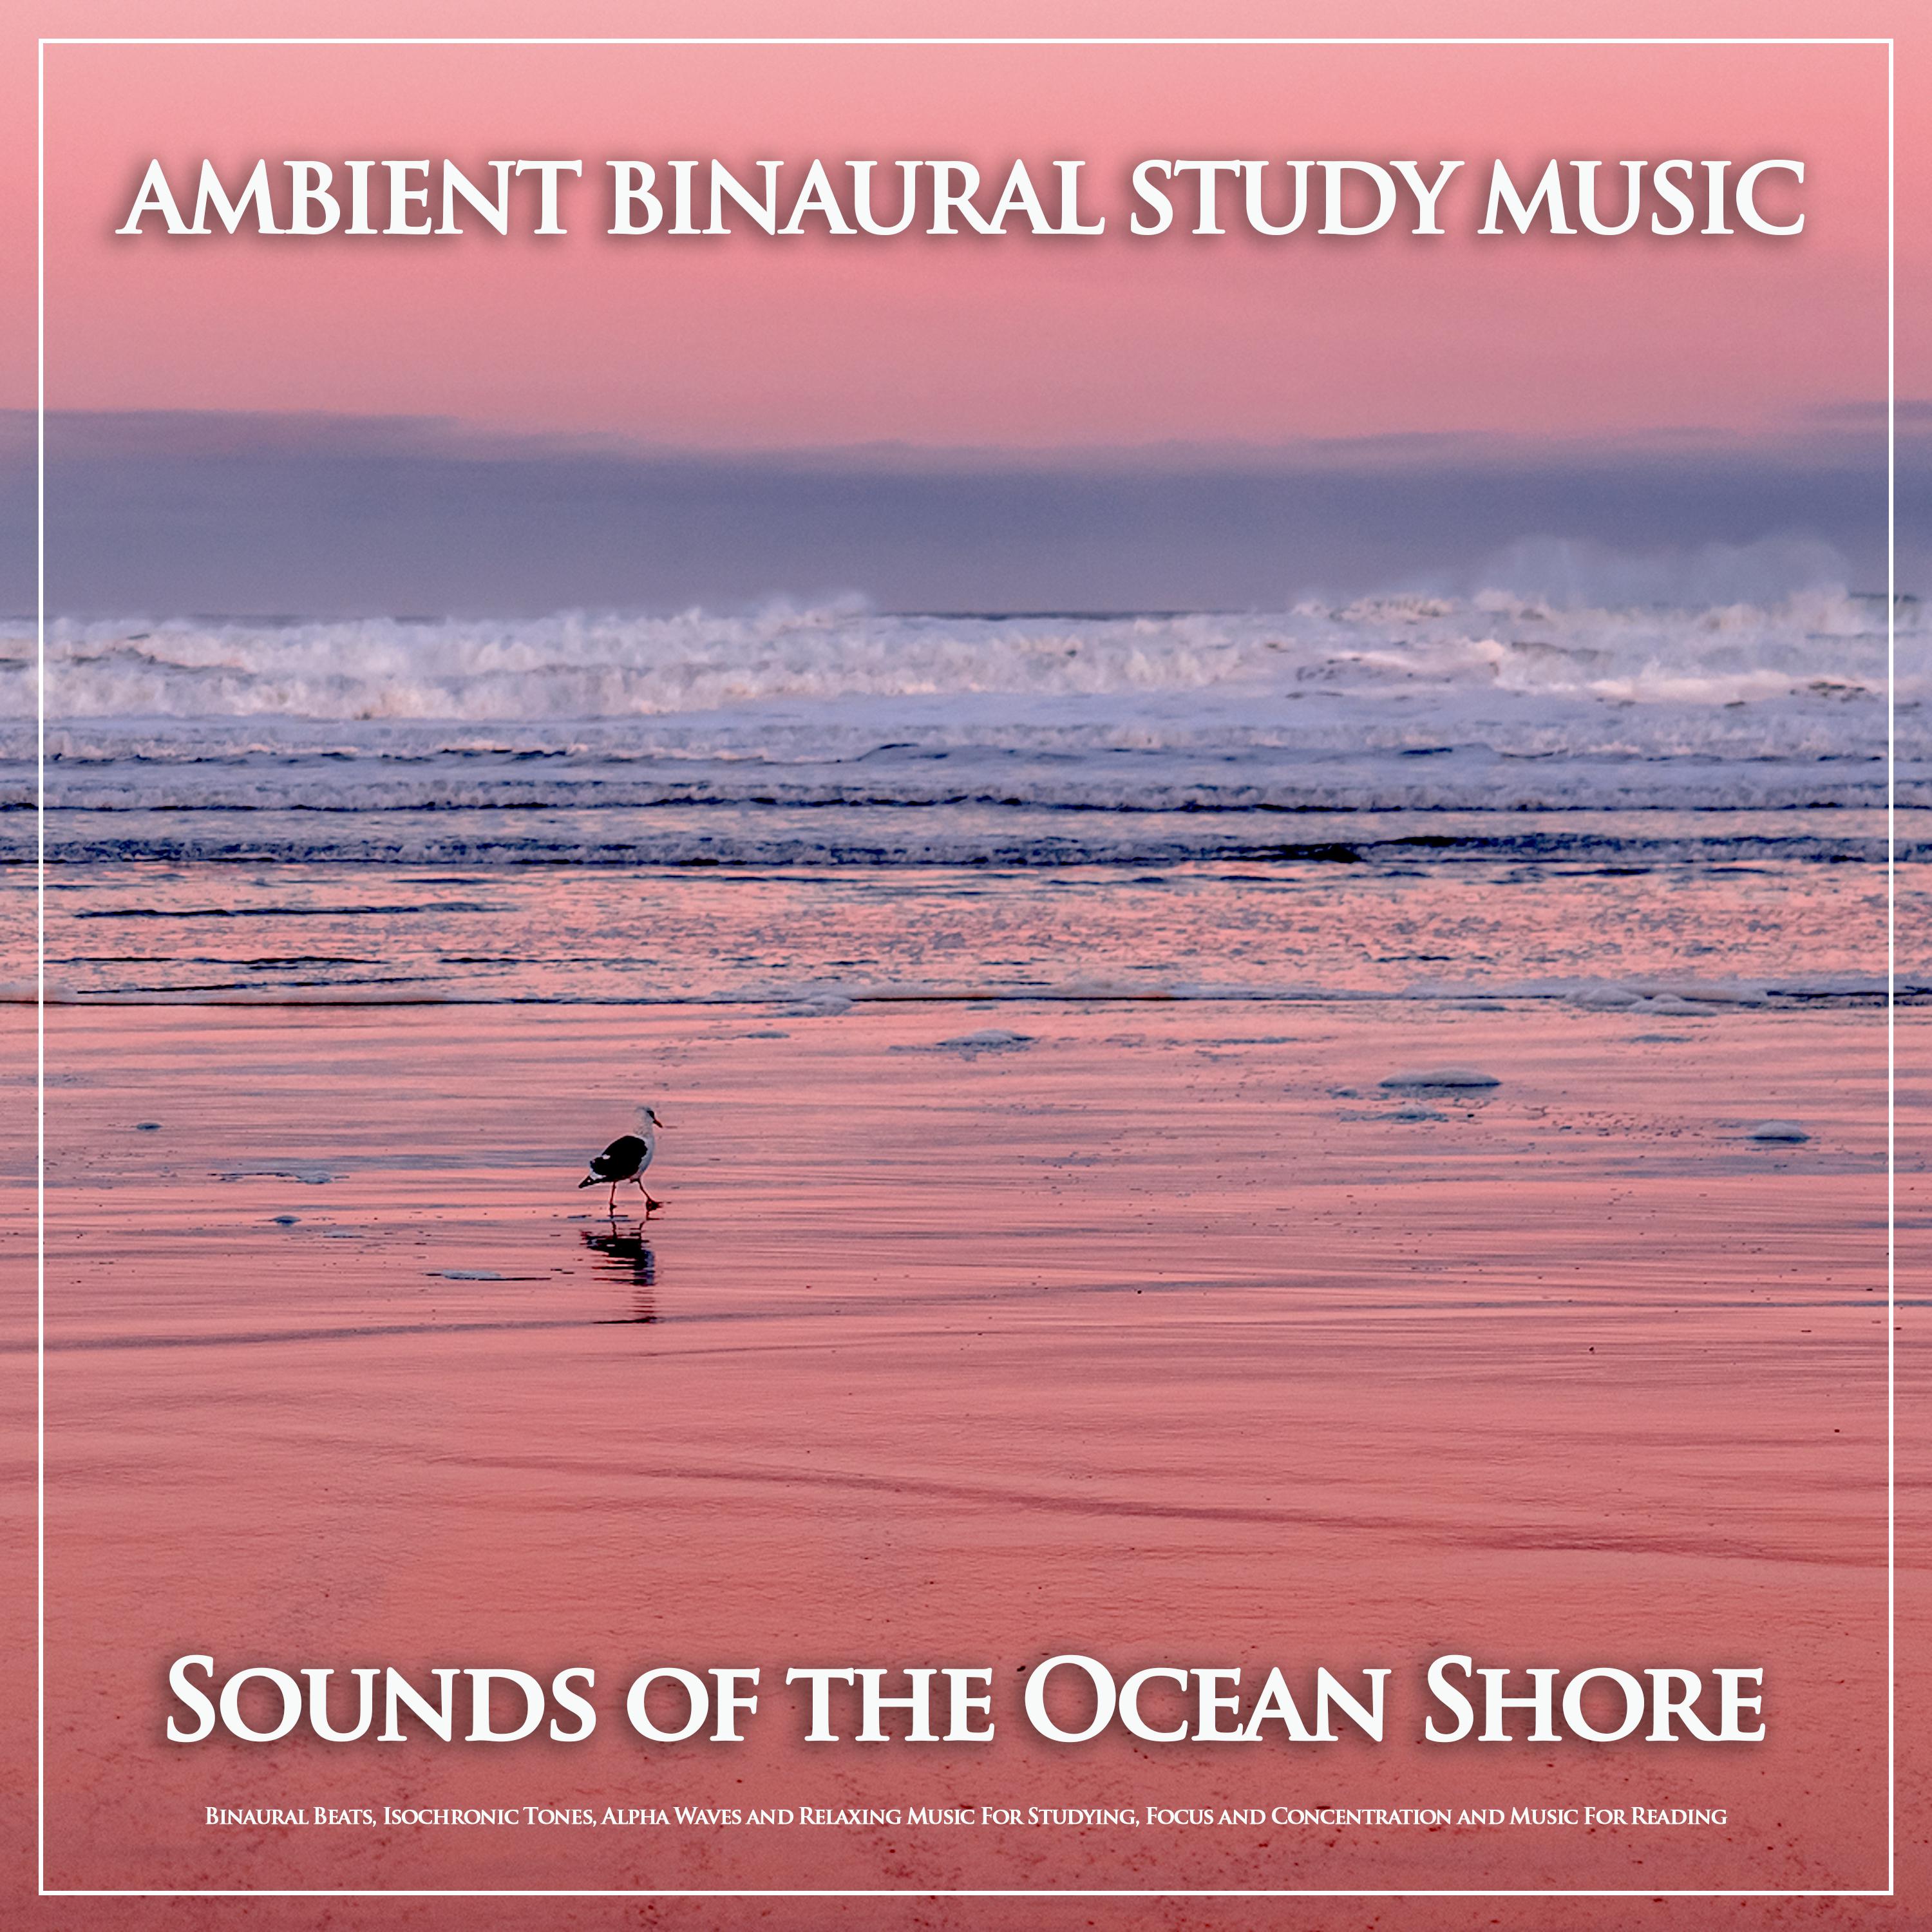 Sounds of the Ocean and Binaural Beats For Focus